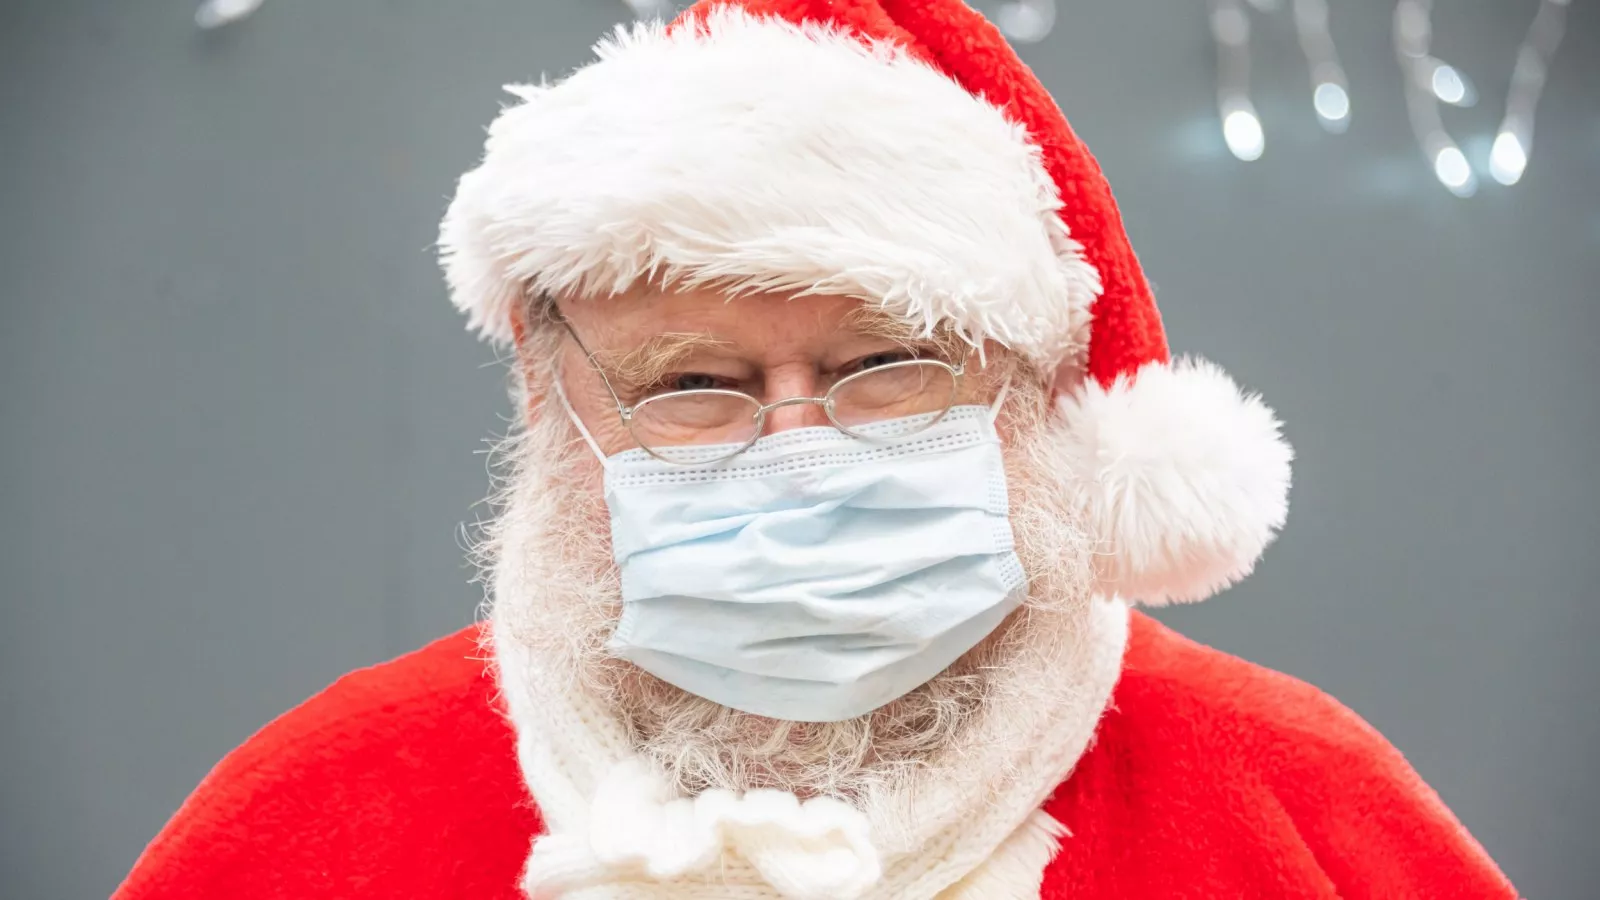 Santa Claus wears a face mask covering while waiting for children